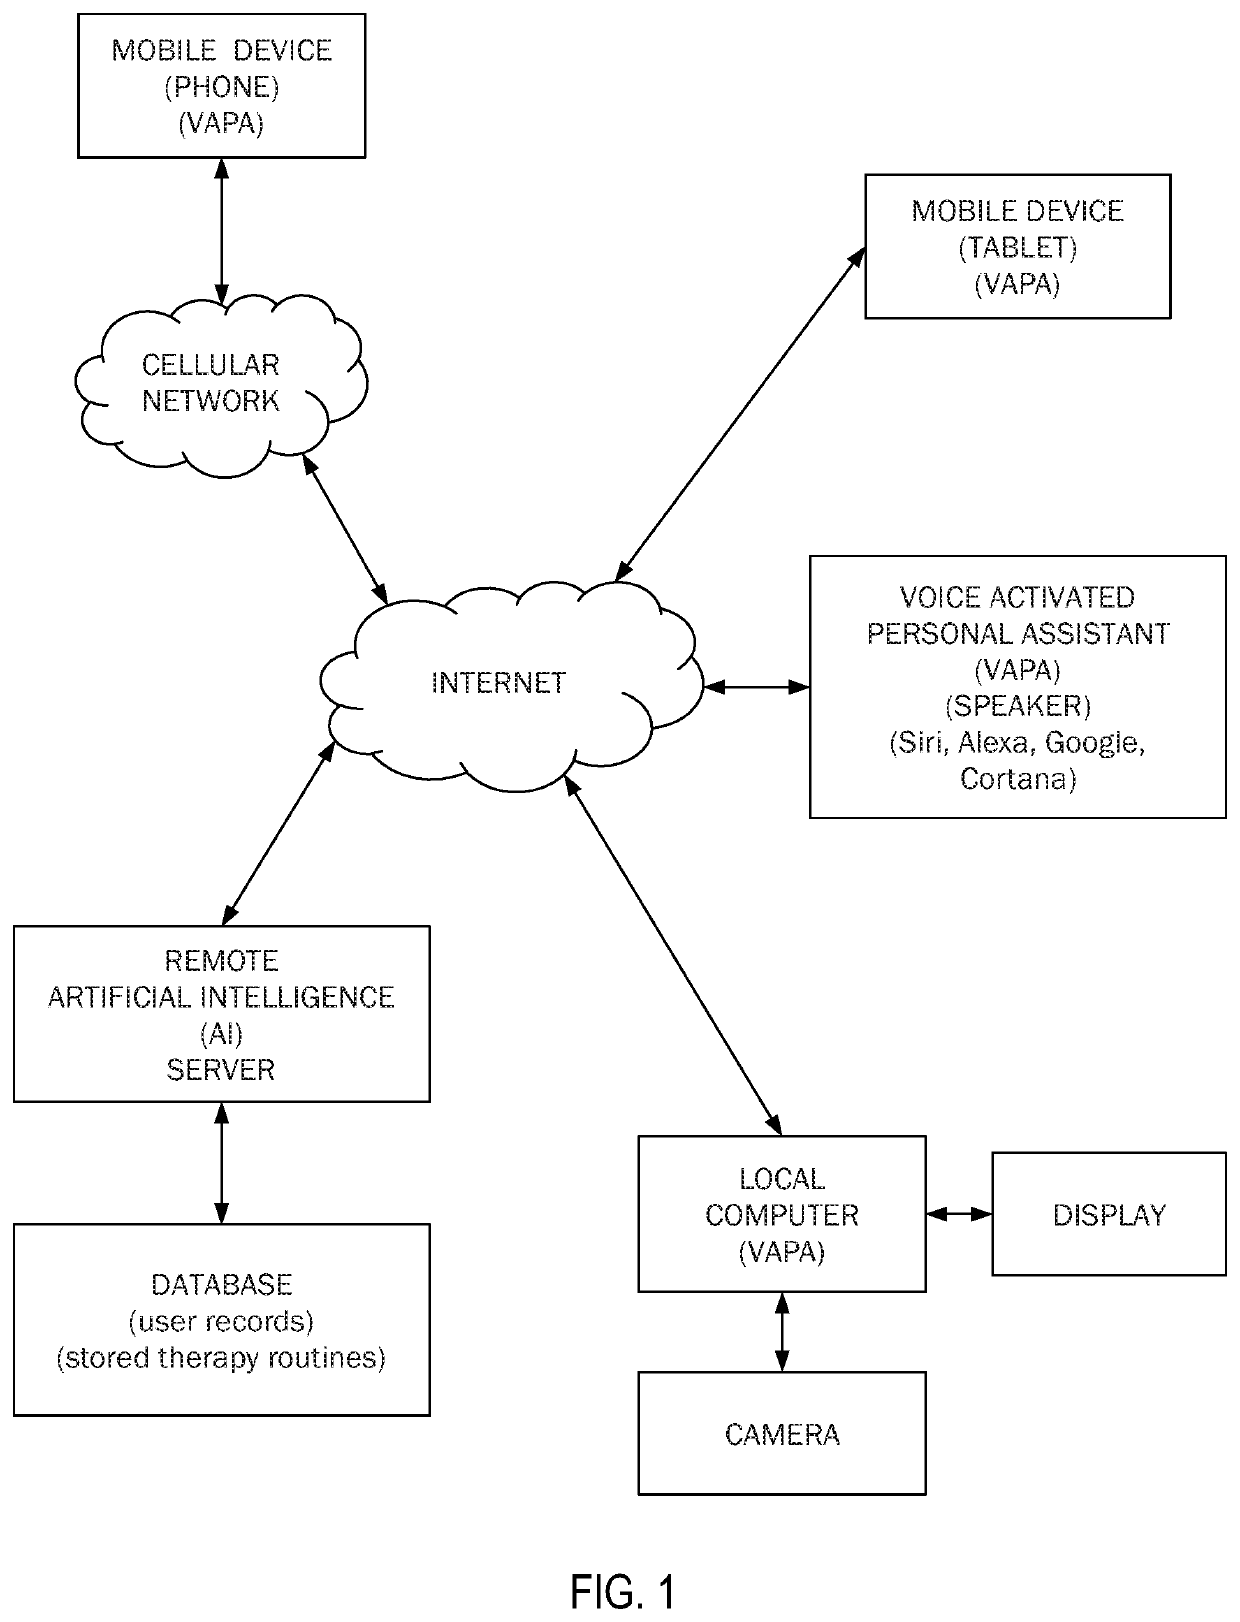 Conversational artificial intelligence driven methods and system for delivering personalized therapy and training sessions